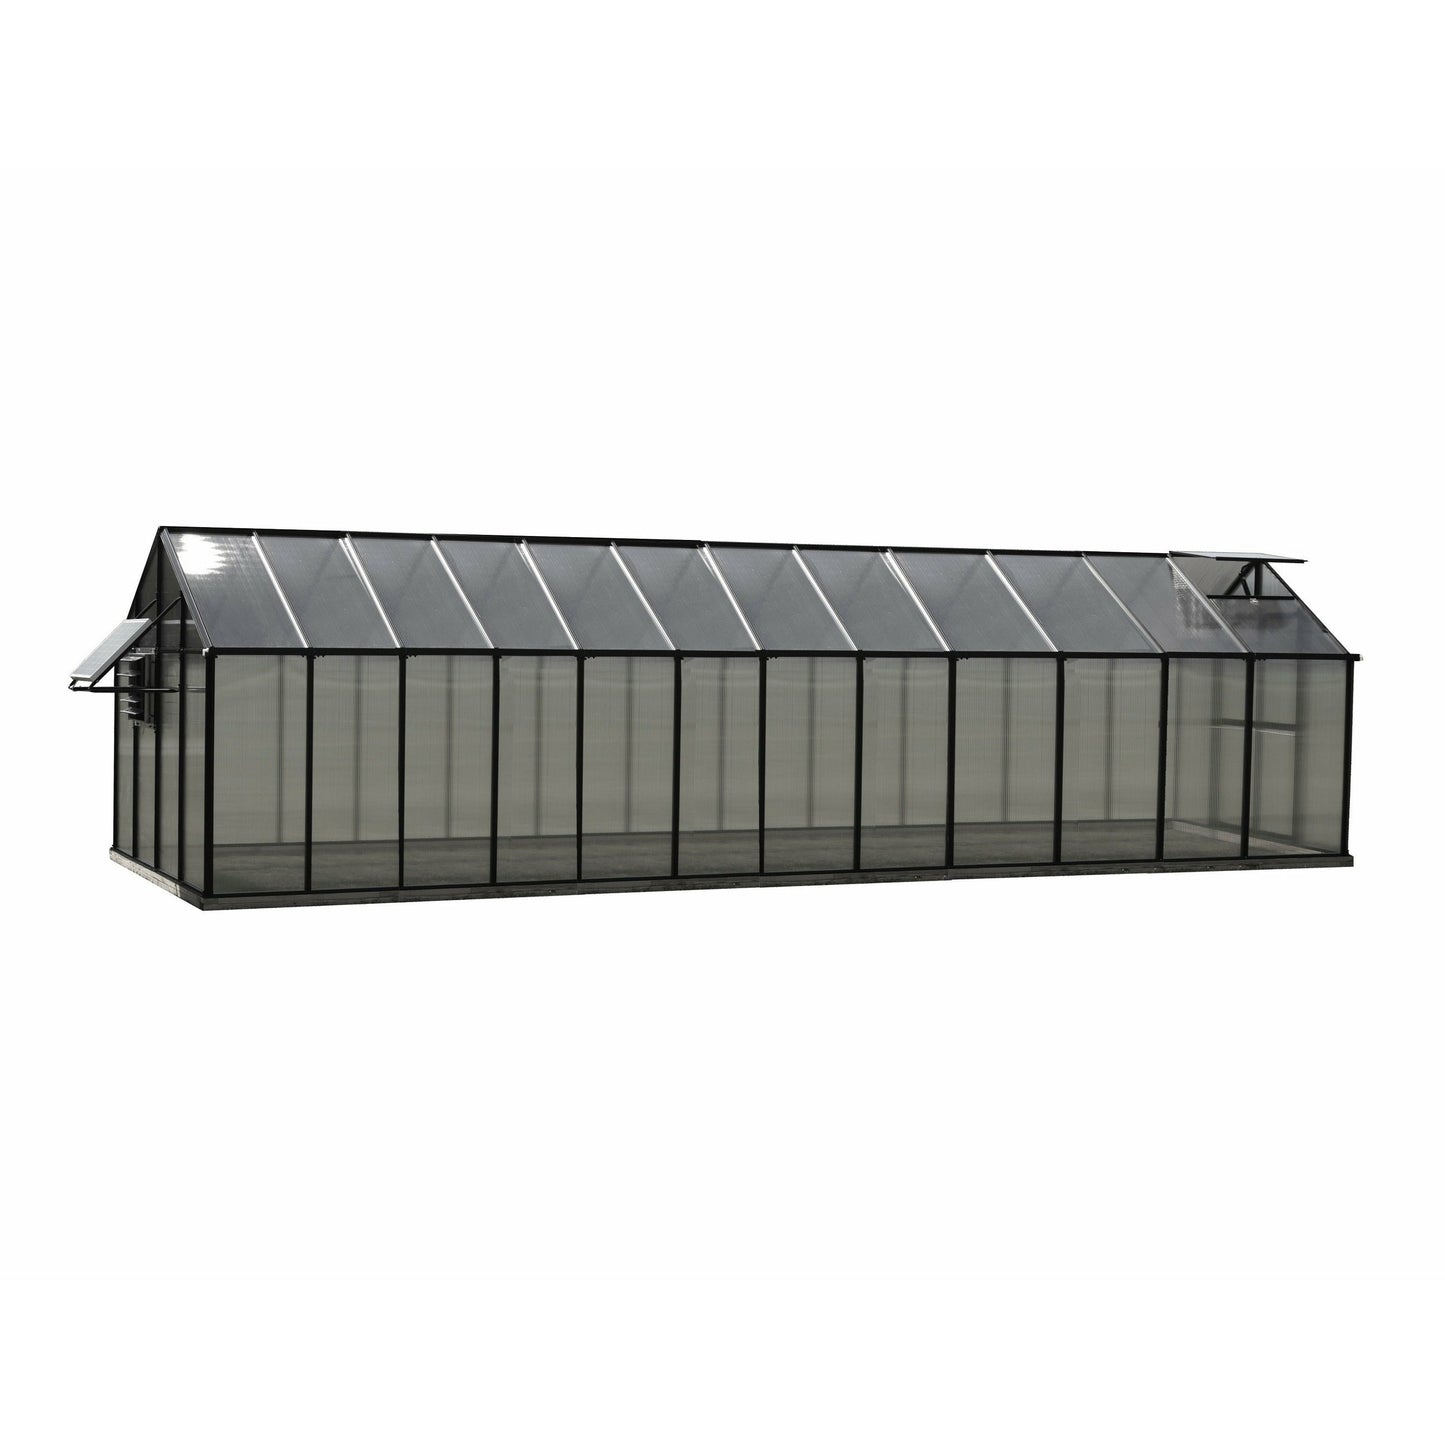 MONT 8×24 Greenhouse- Mojave Package - Black Finish